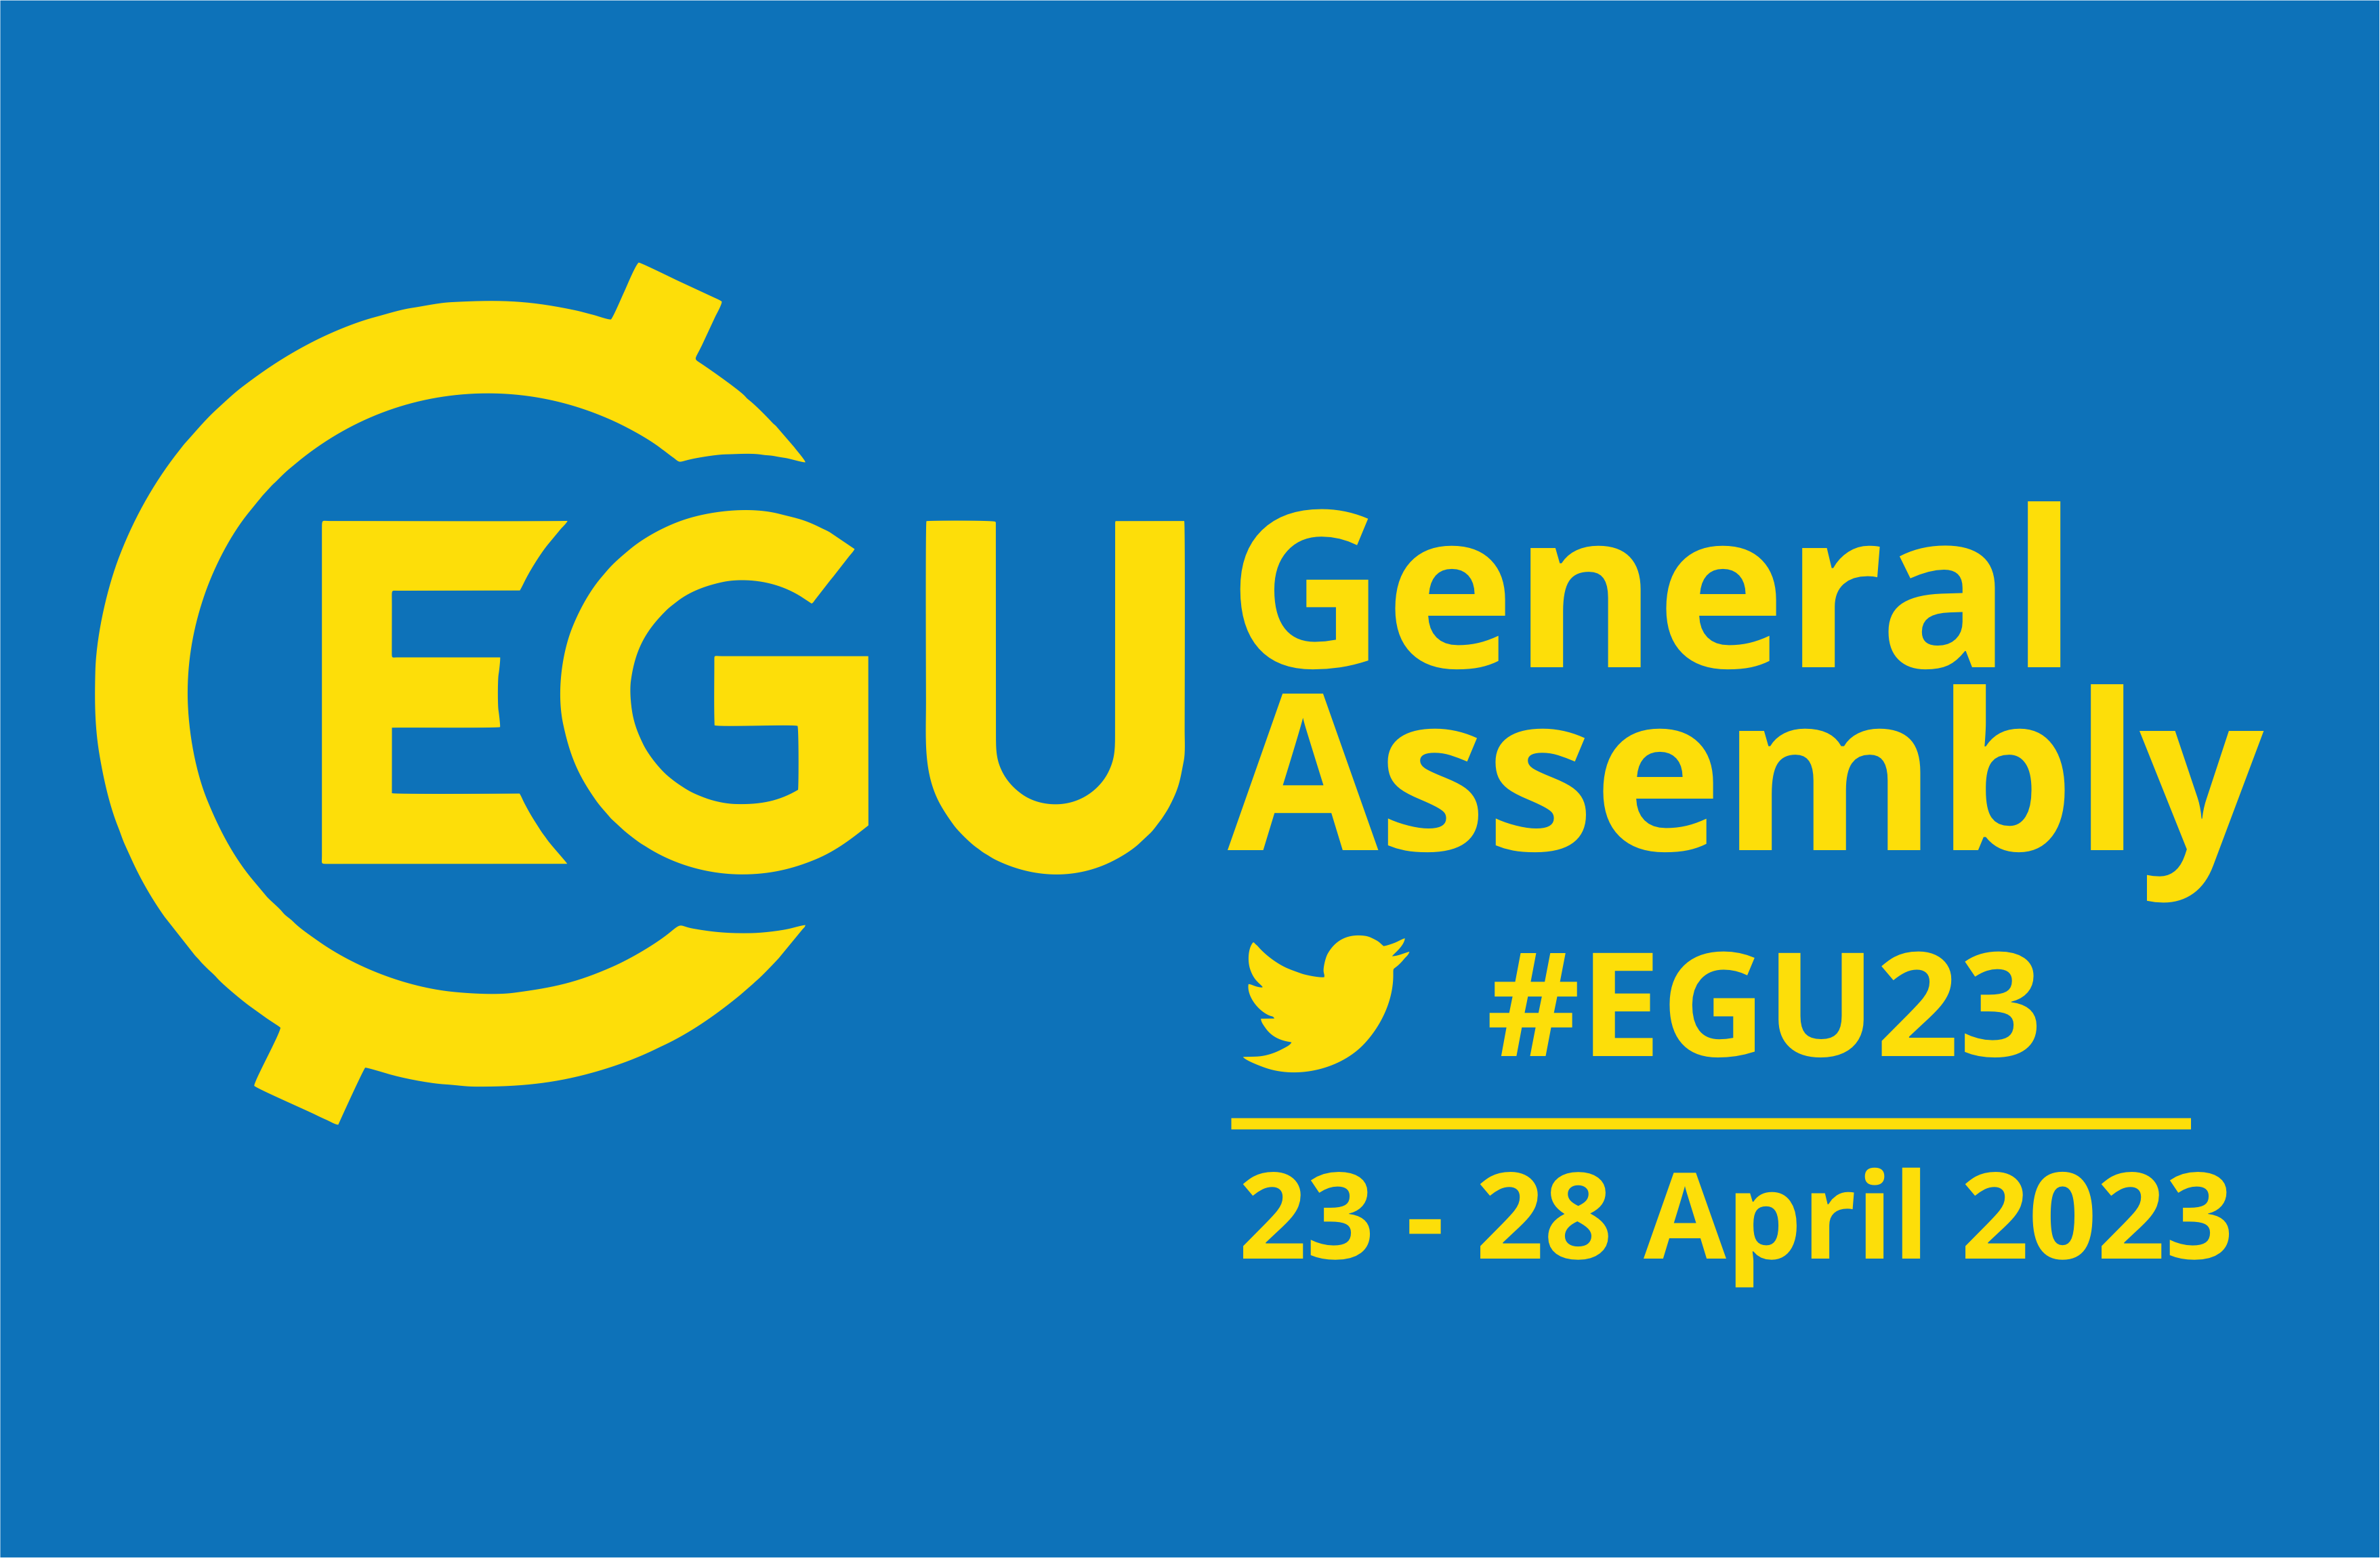 Blue background. Yellow text reads"EGU General Assembly #EGU23 23-28 April 2023"